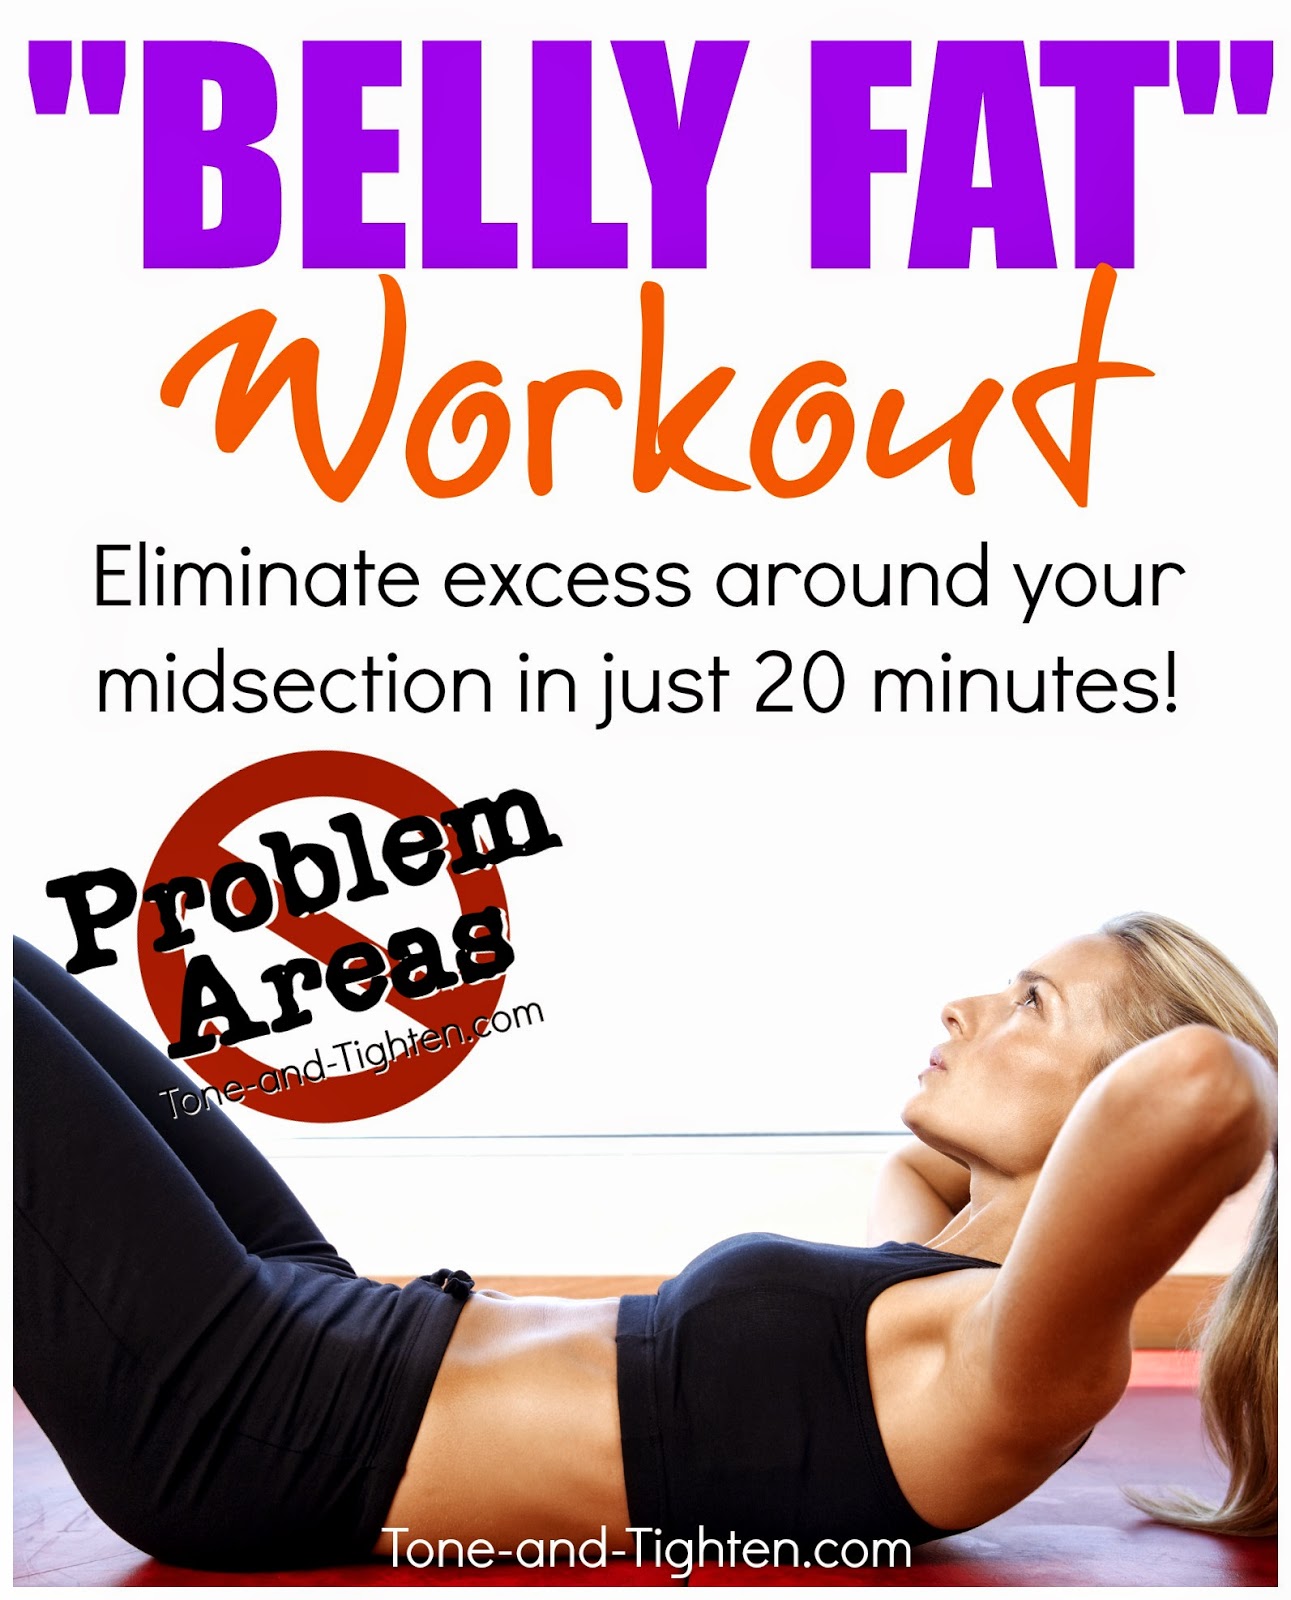 How to get rid of belly fat "Problem Areas" series on